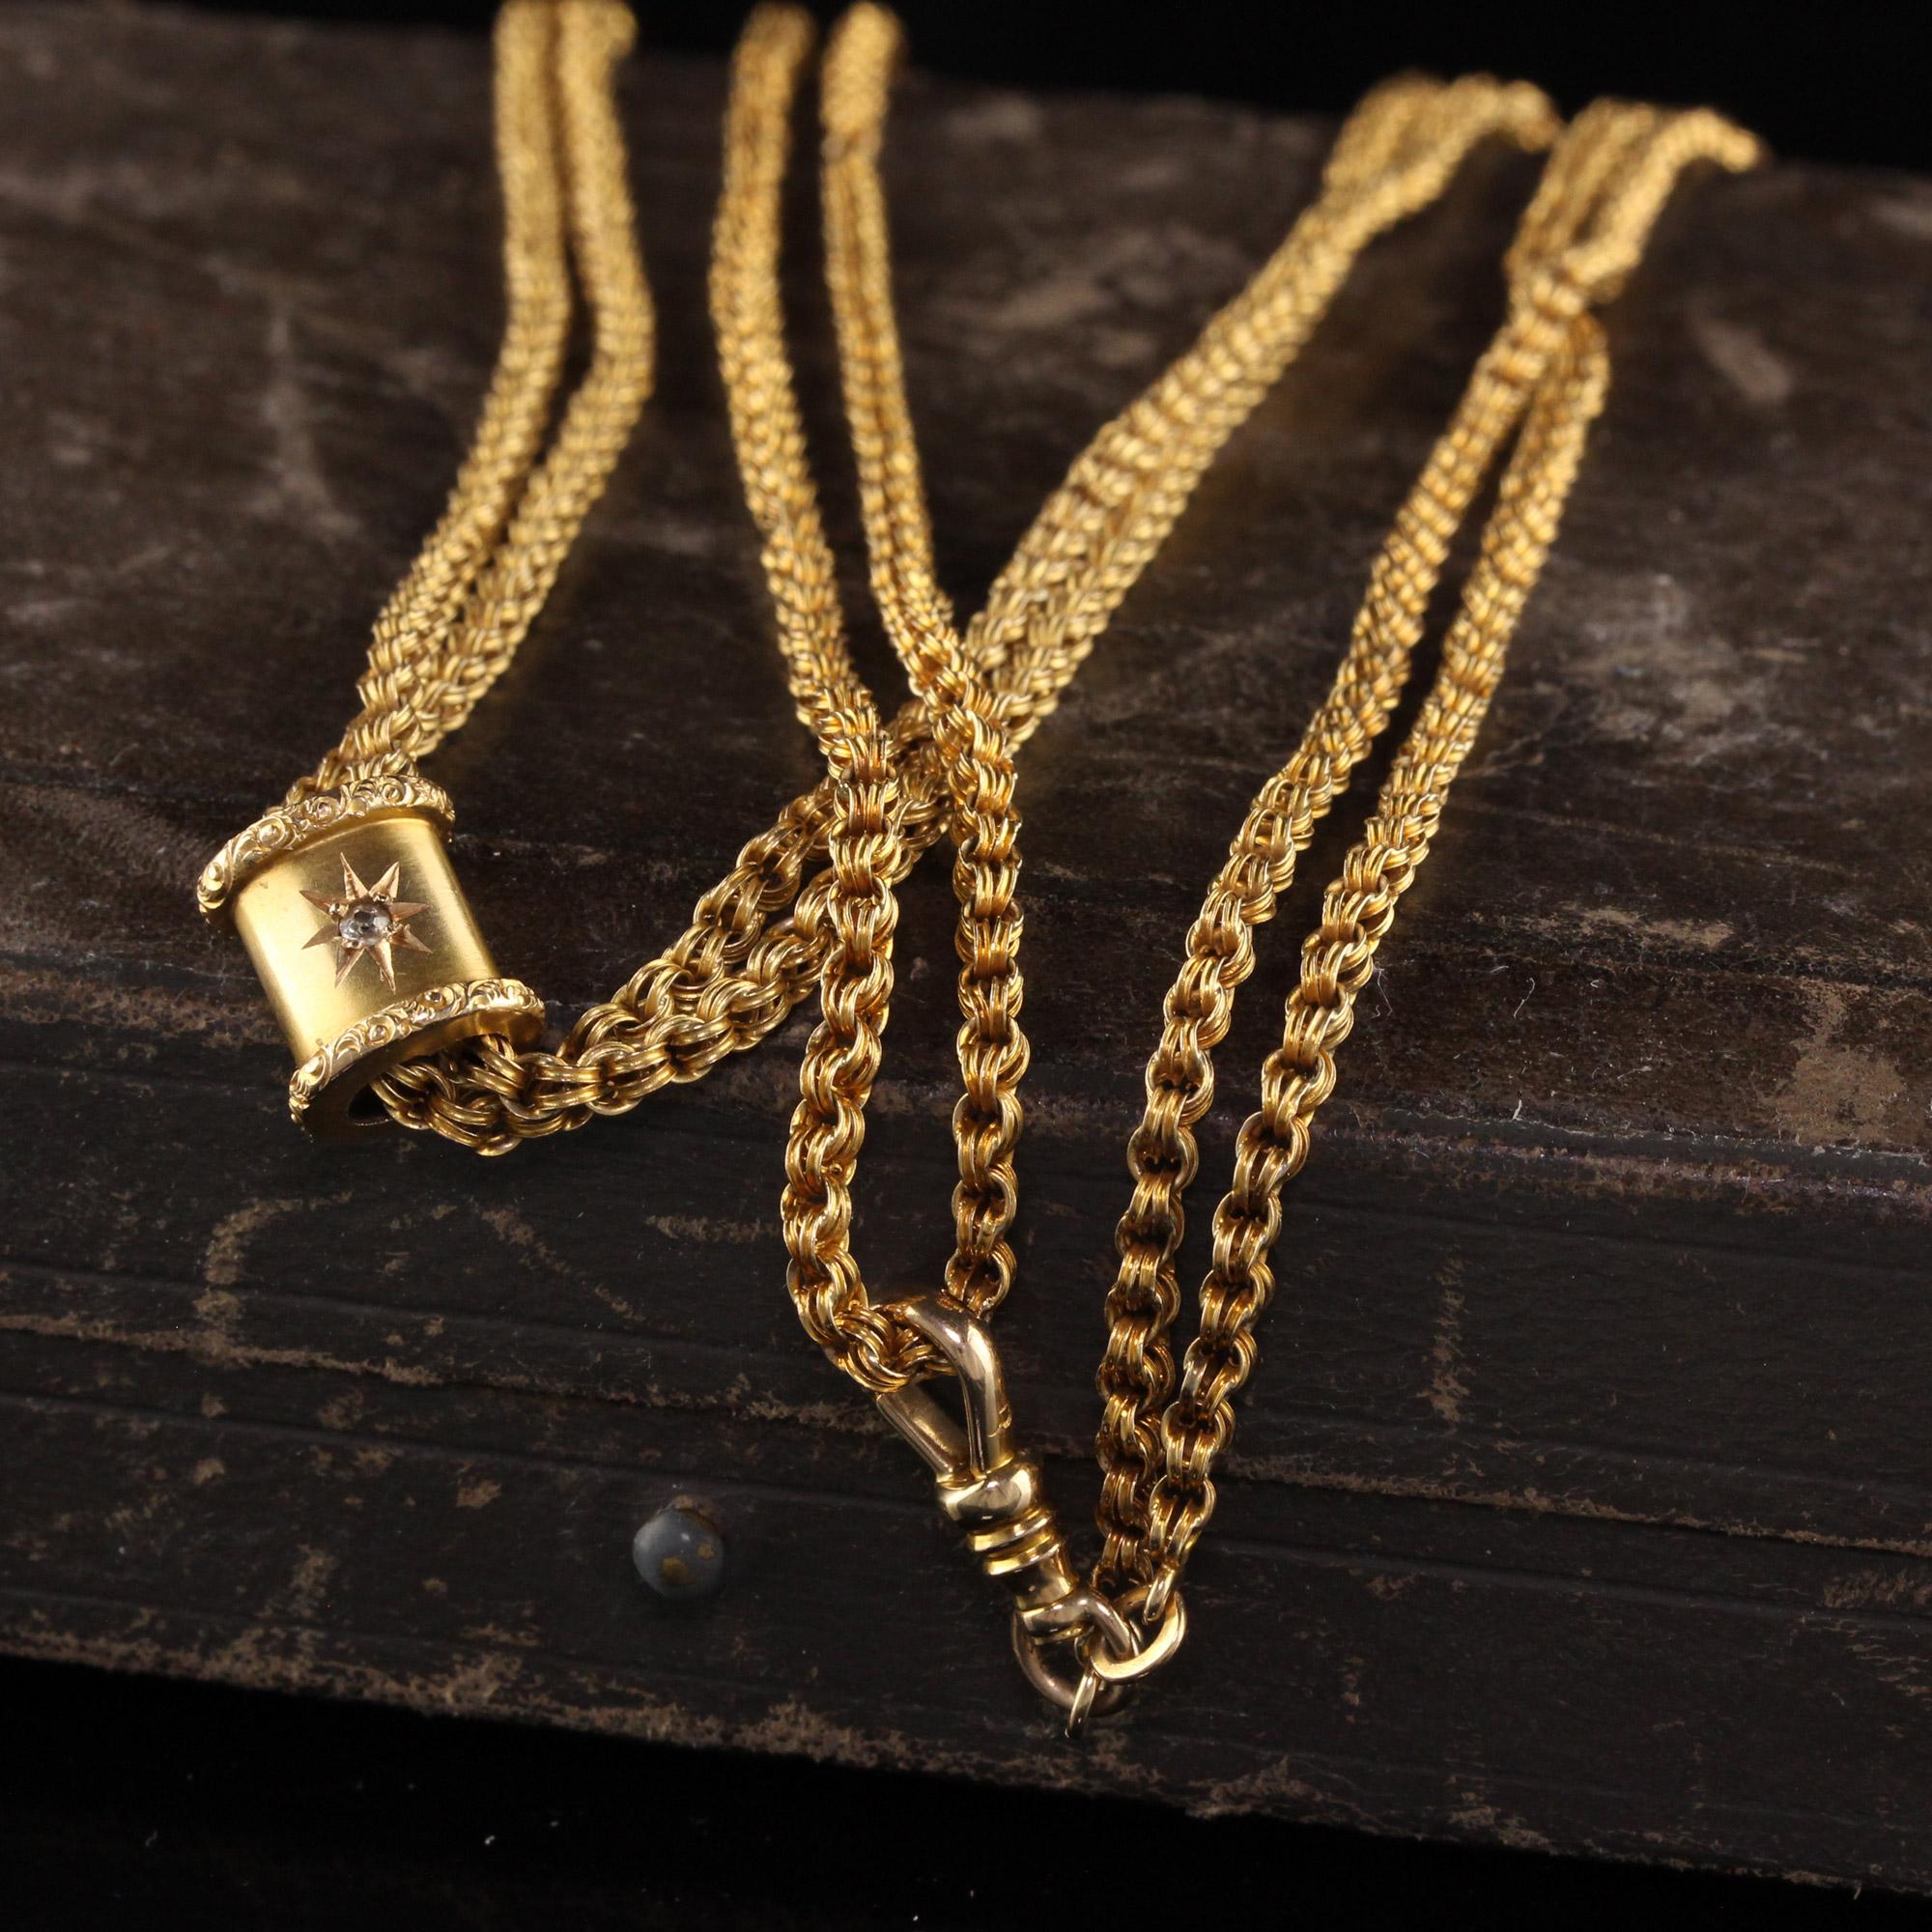 Beautiful Antique Victorian 14K Yellow Gold Old Euro Diamond Lariat Necklace - 50 inches. This beautiful necklace is crafted in 14k yellow gold. The necklace is an intricate lightweight chain weave with a lariat slider that has an old european cut